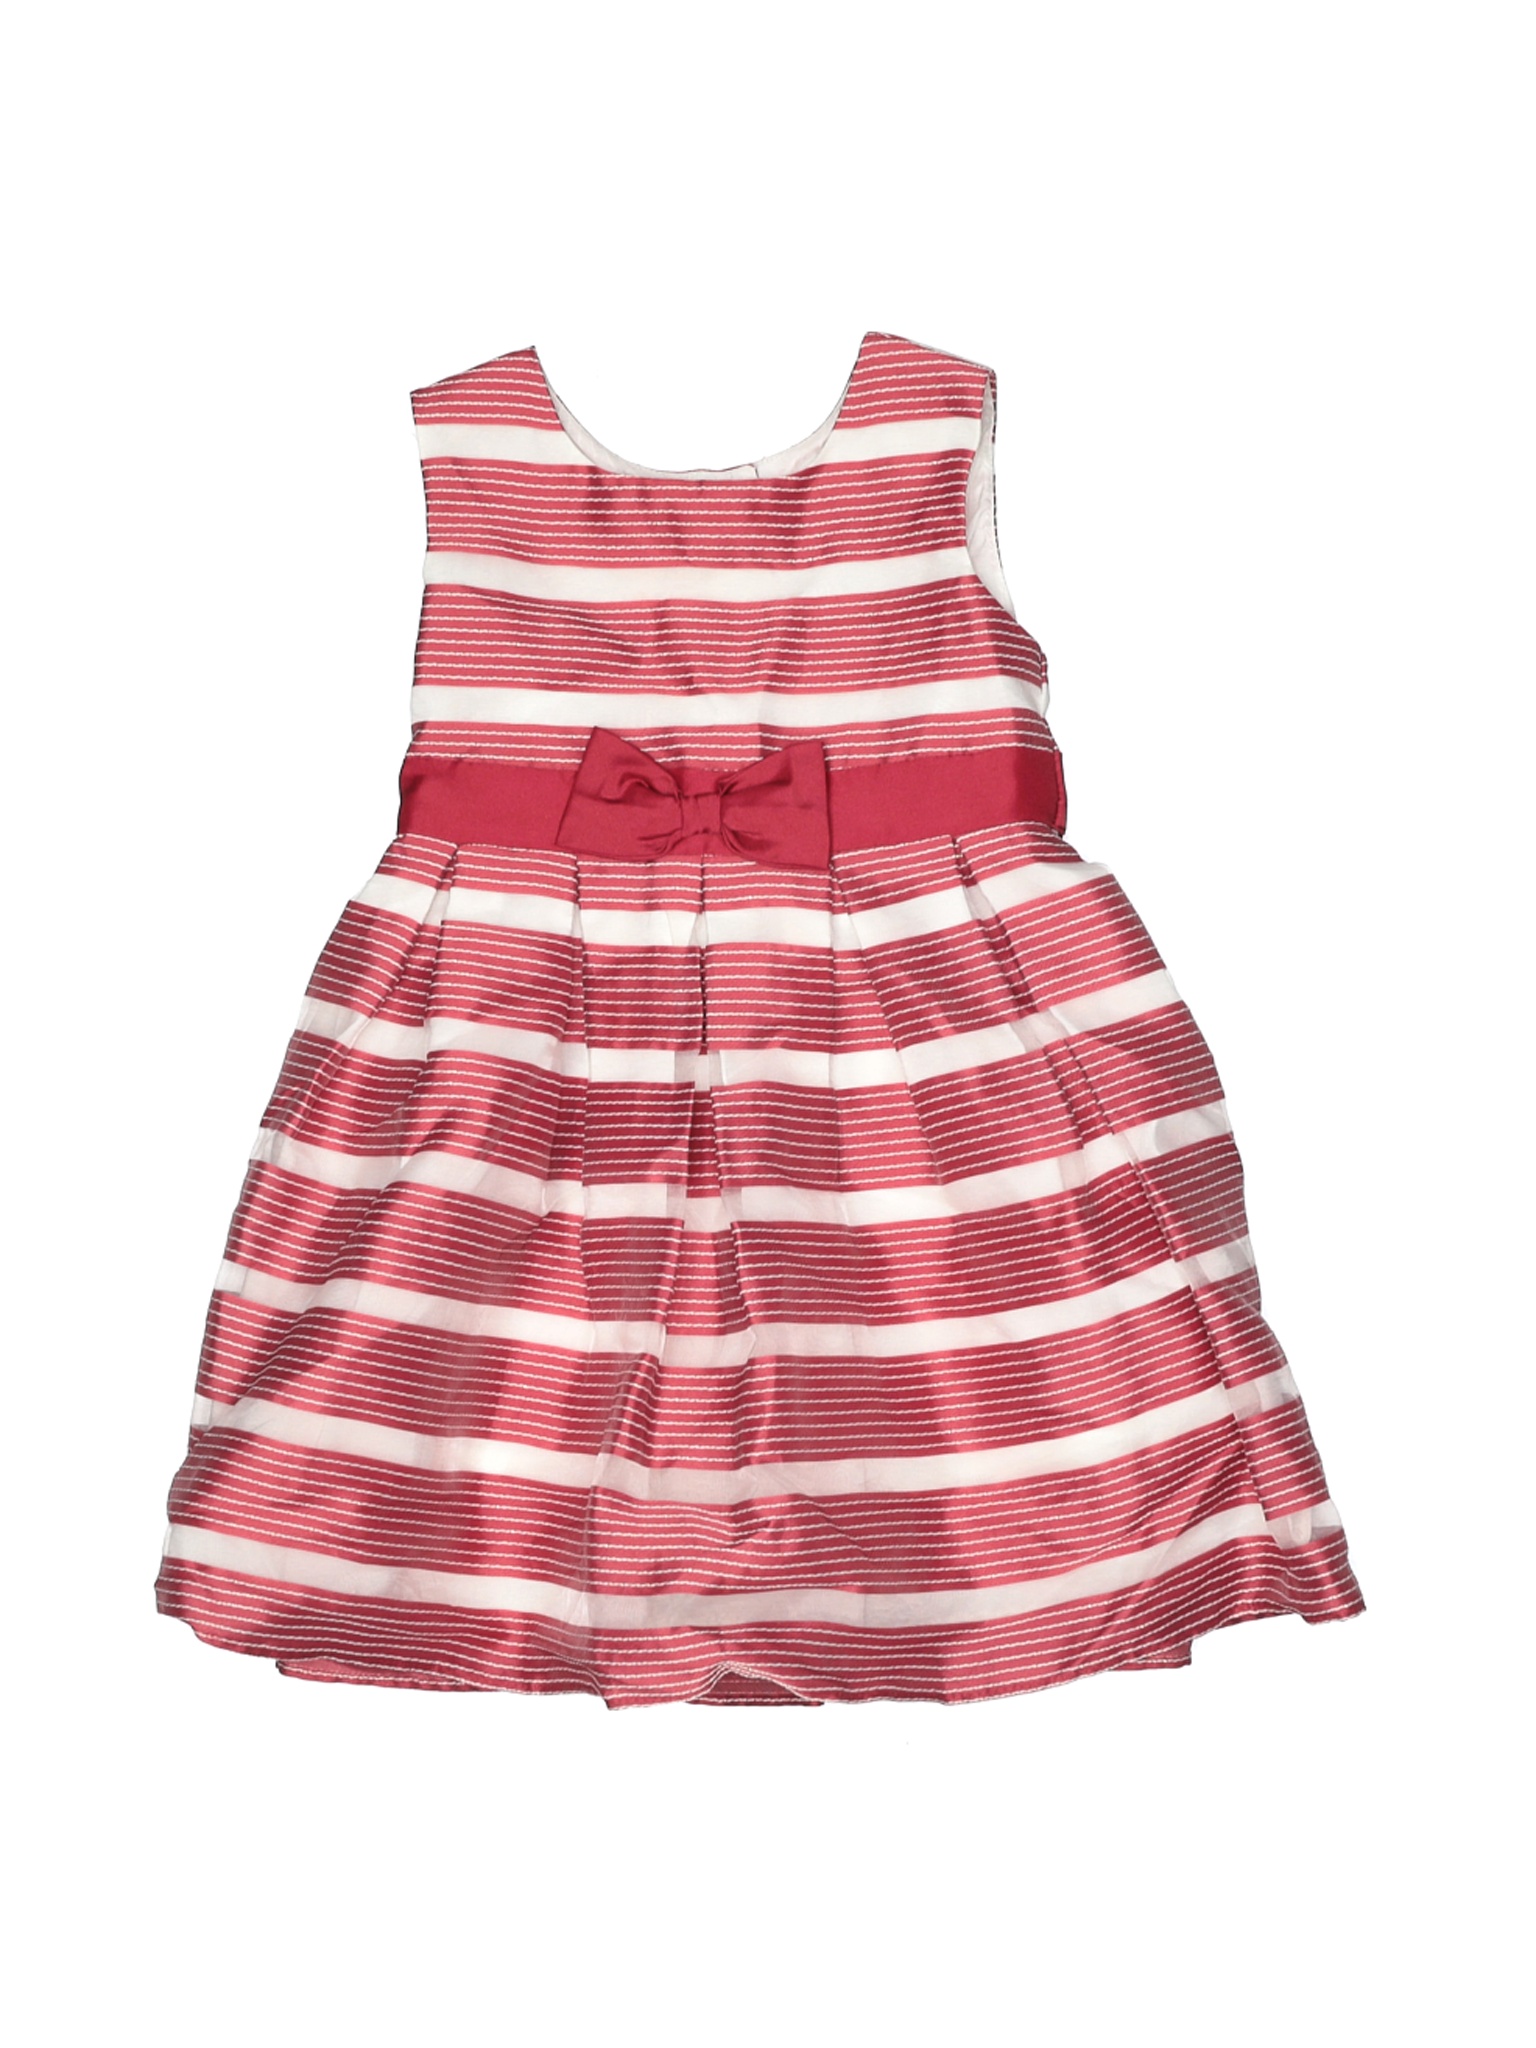 Jona Michelle Girls Red Special Occasion Dress 3T | eBay